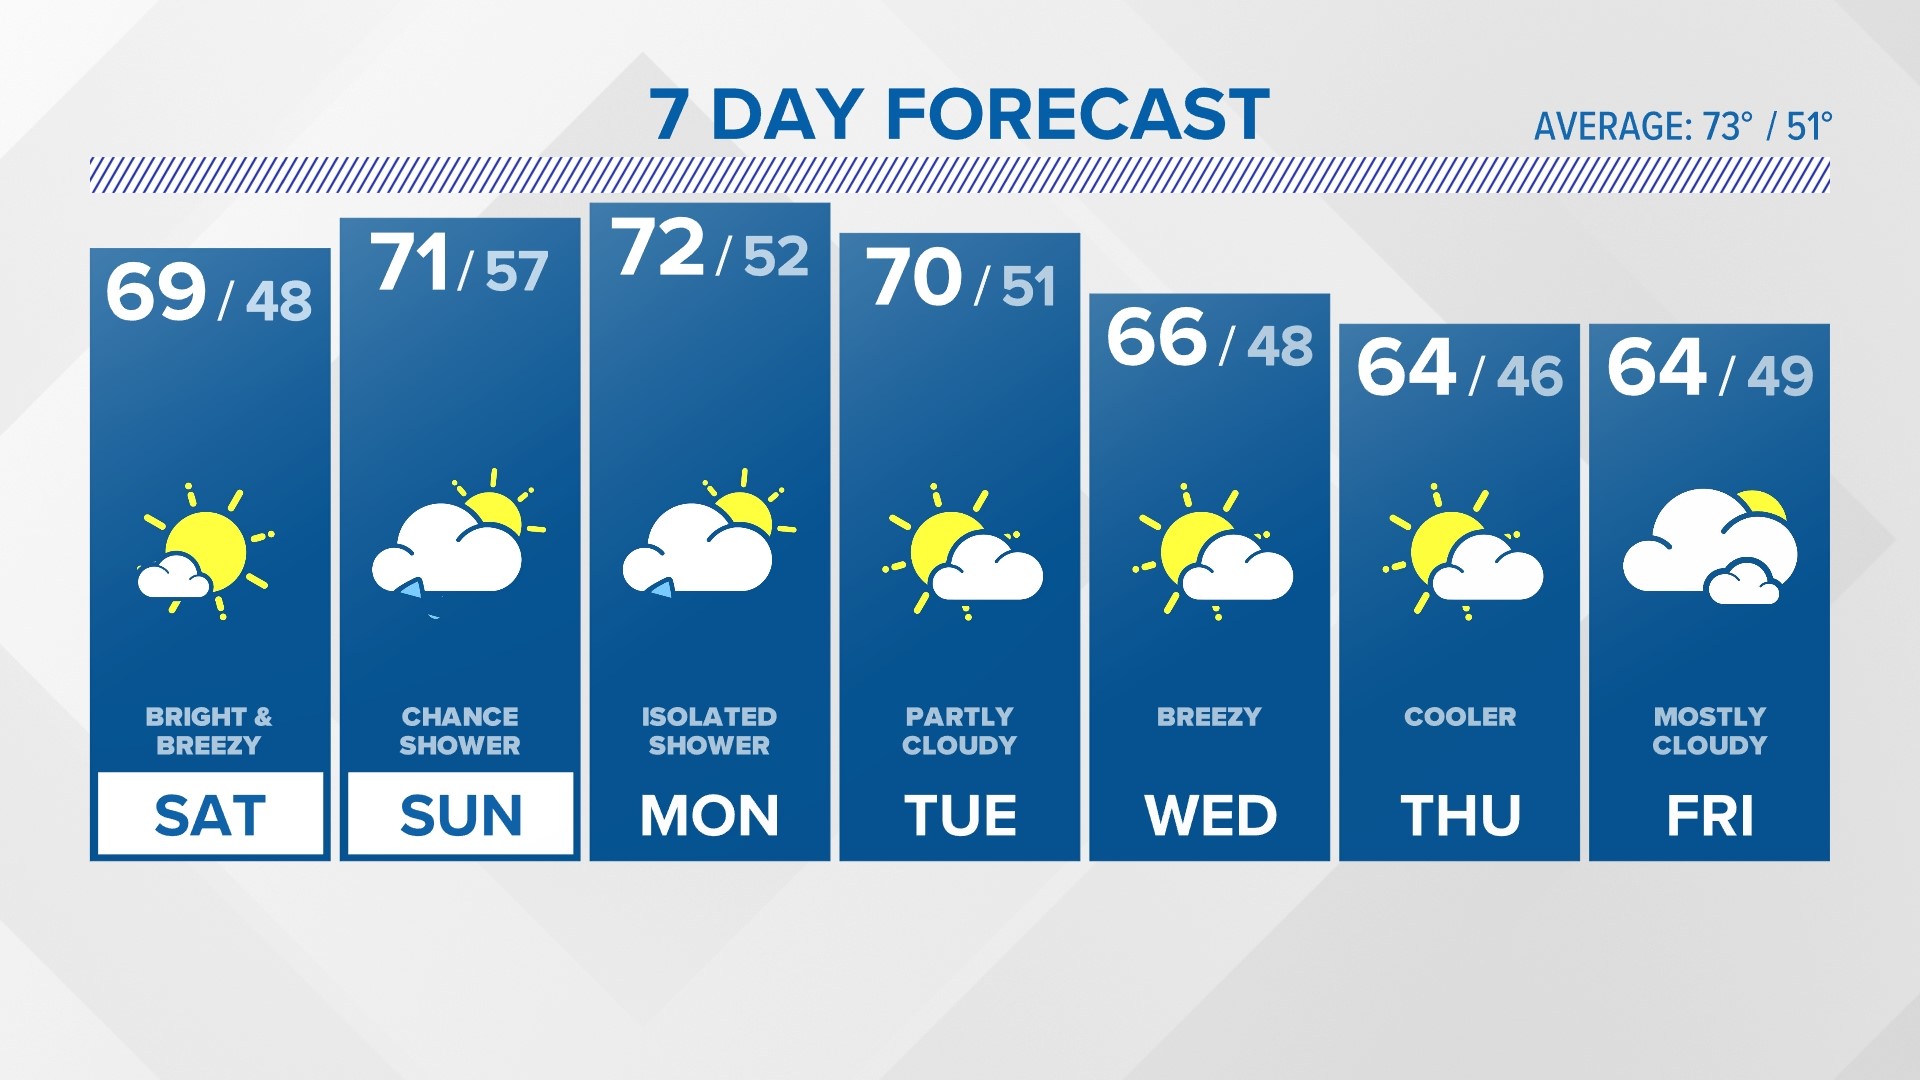 Temperatures warm for the weekend but then cool down into next week.